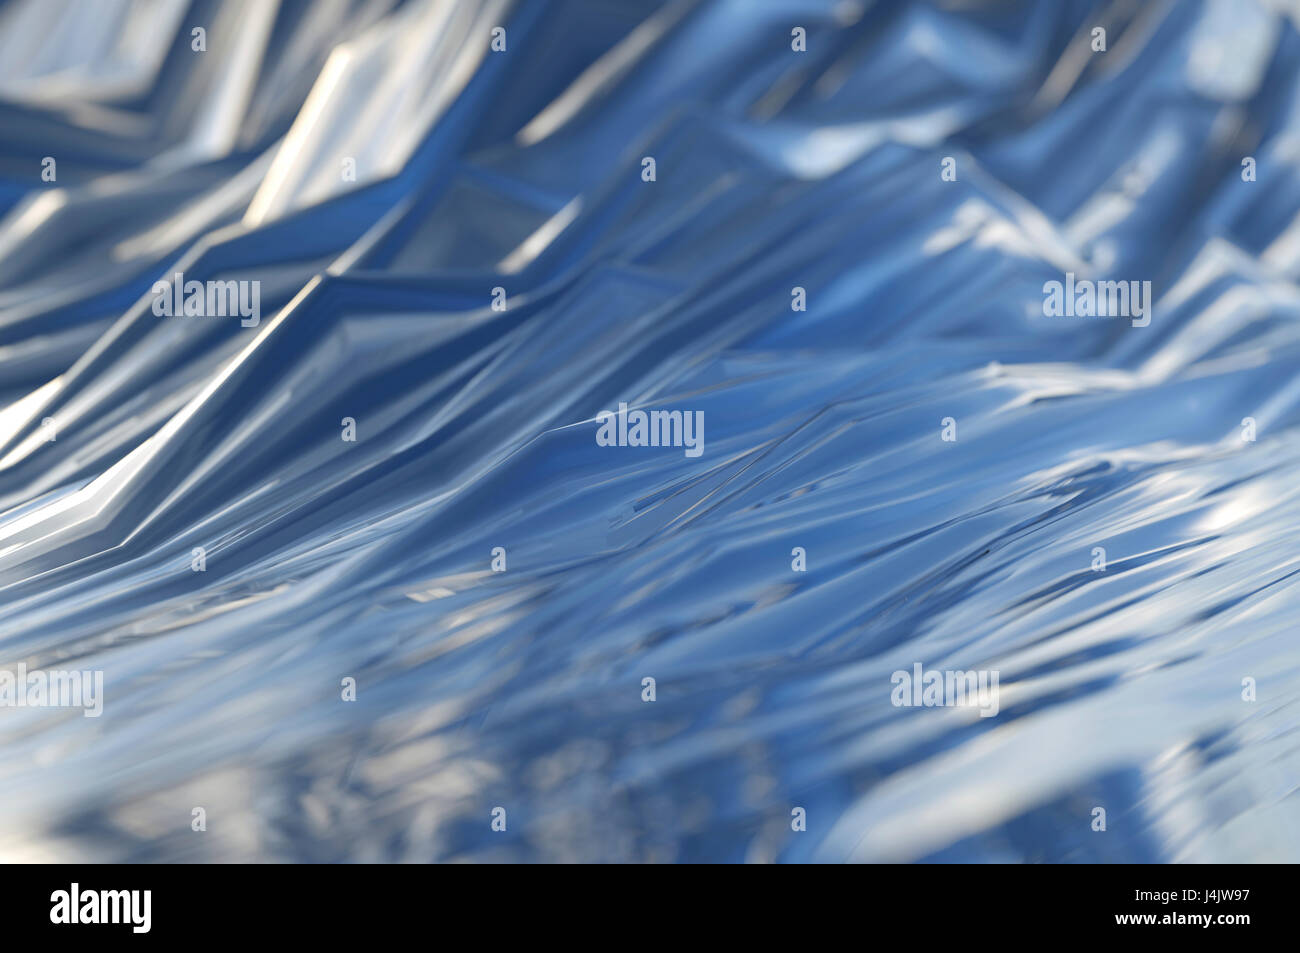 Abstract blue textured background. Stock Photo